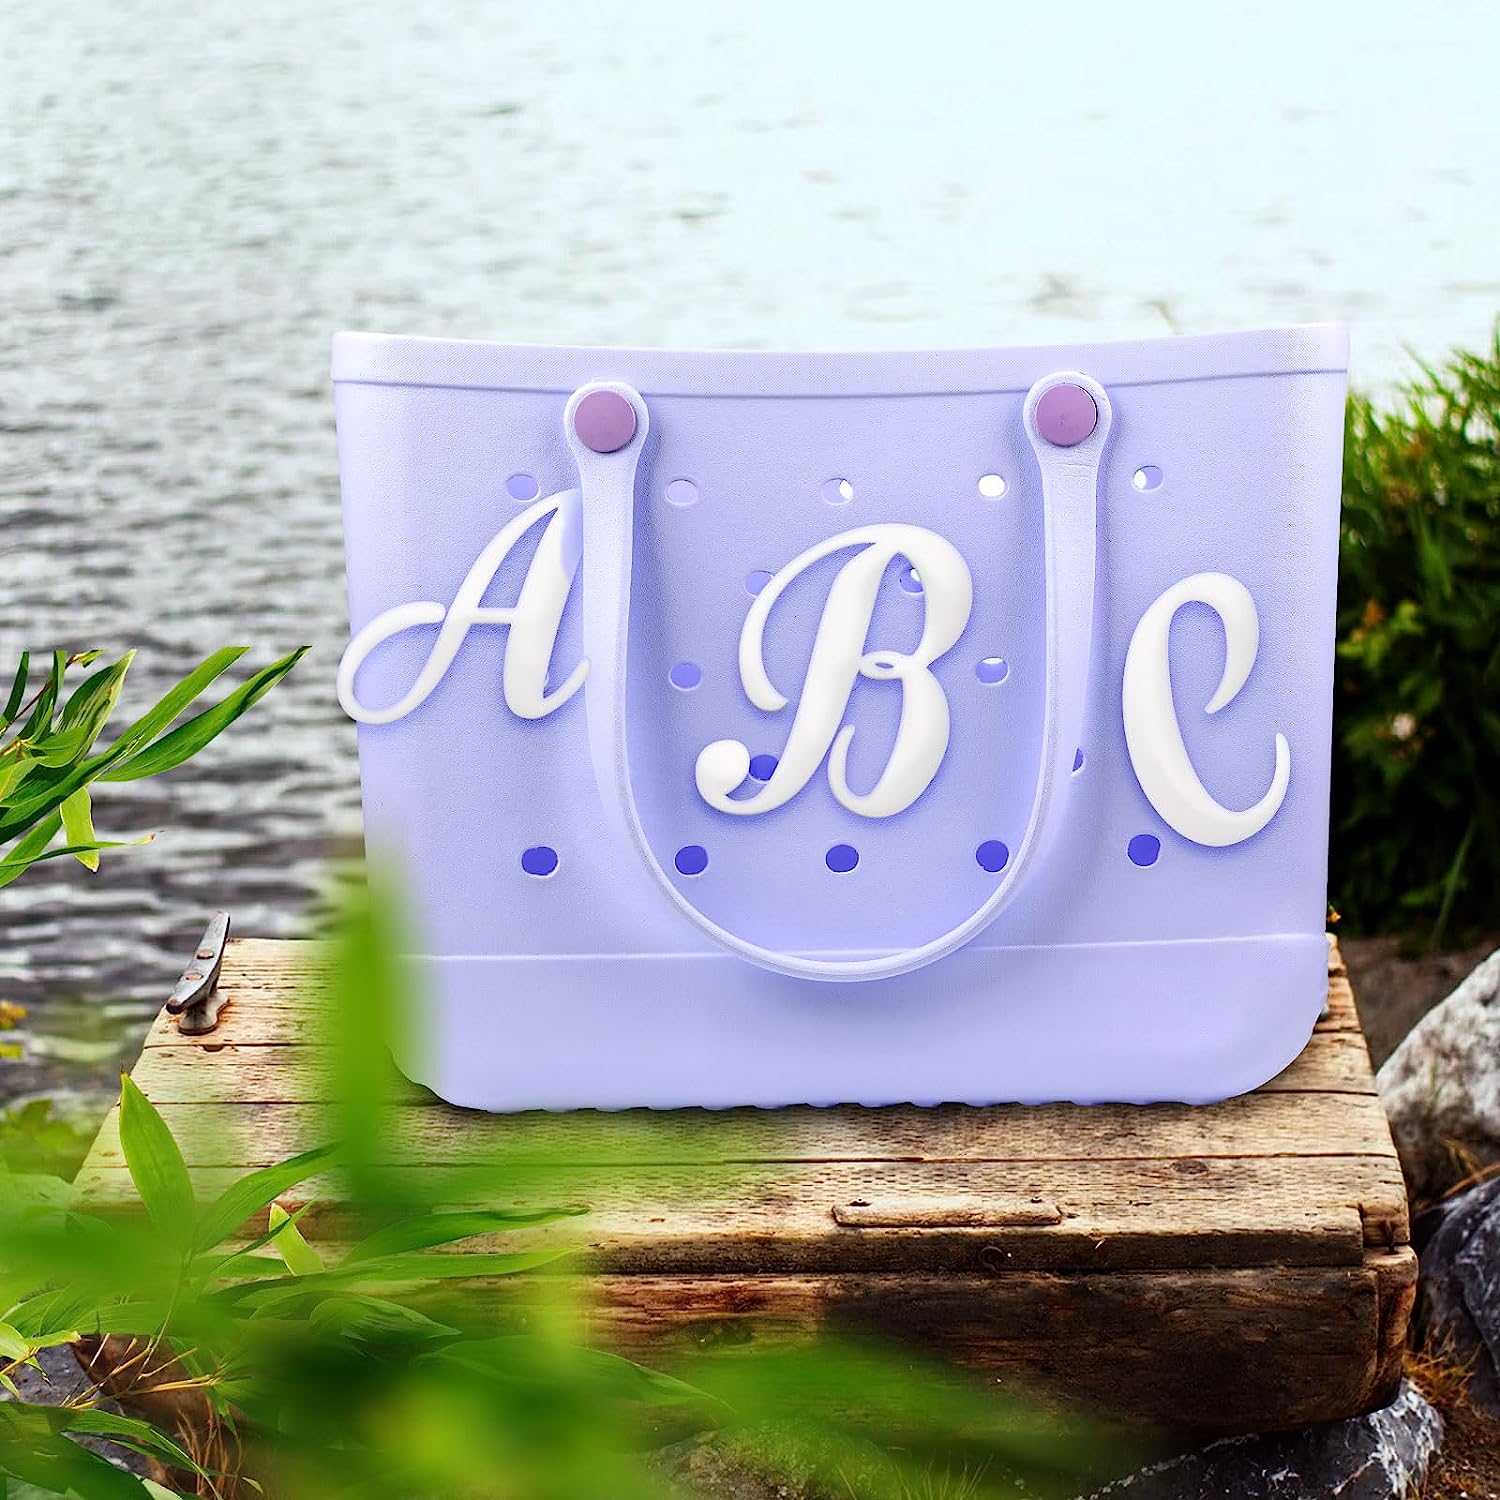 3D letter to personalize your women's beach tote bag